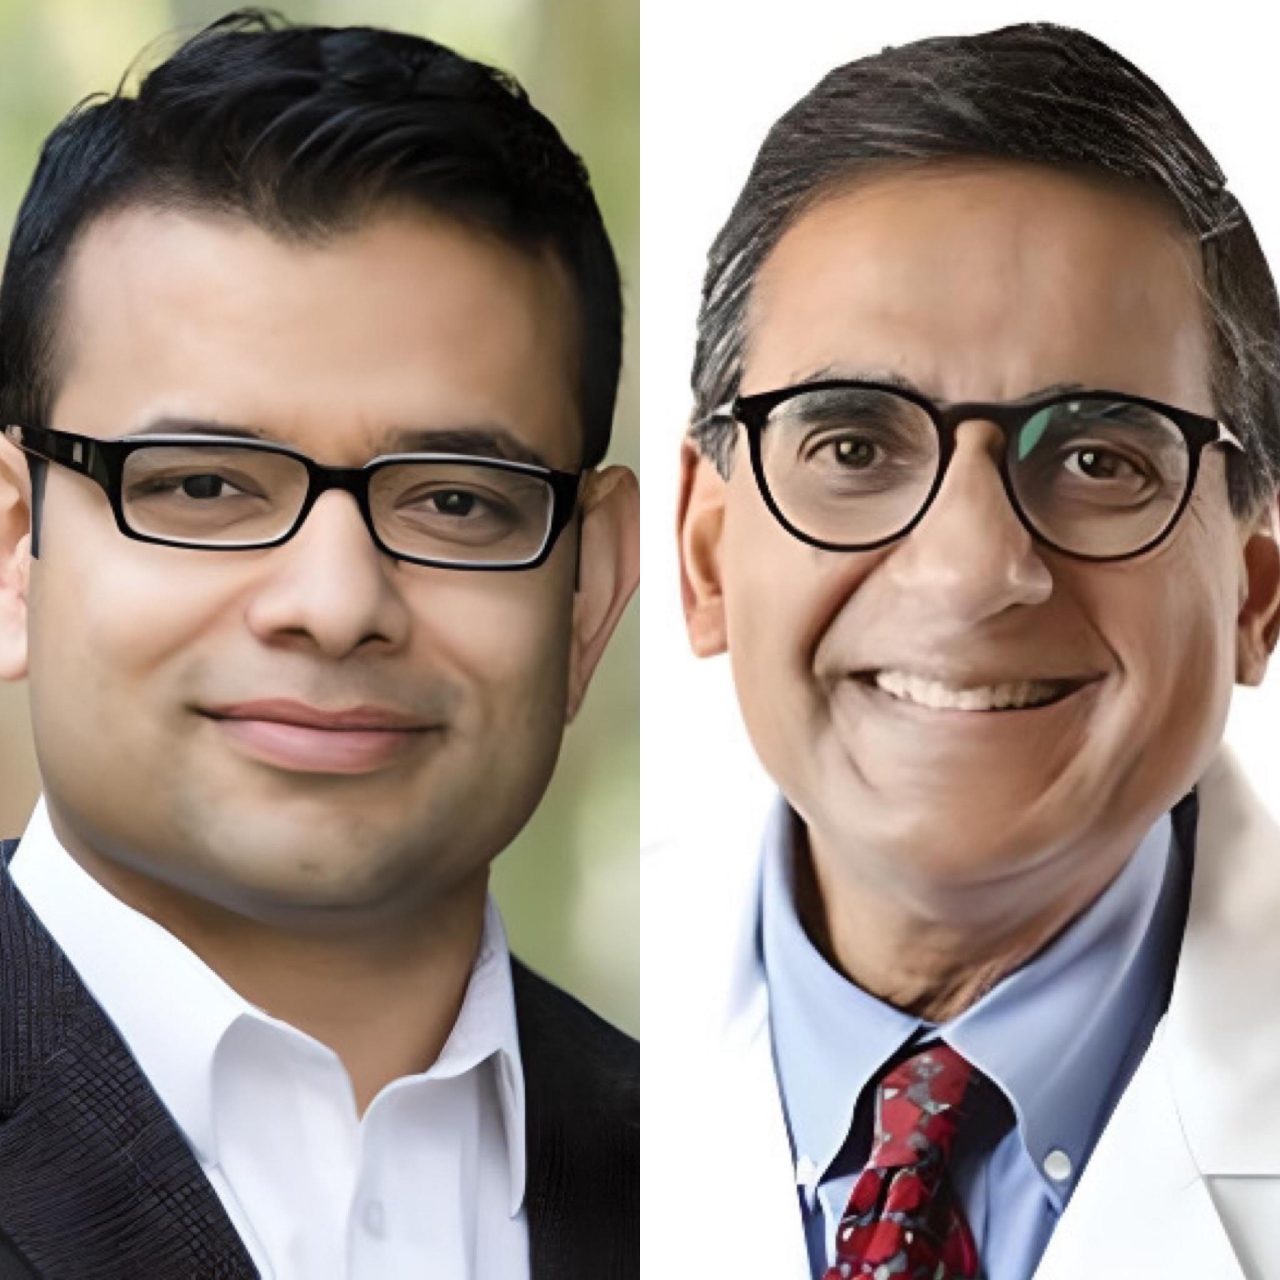 Sumanta K. Pal: Our fearless City of Hope’s Department of Medical Oncology leader Ravi Salgia now runs one of the largest Medical Oncology departments in the country